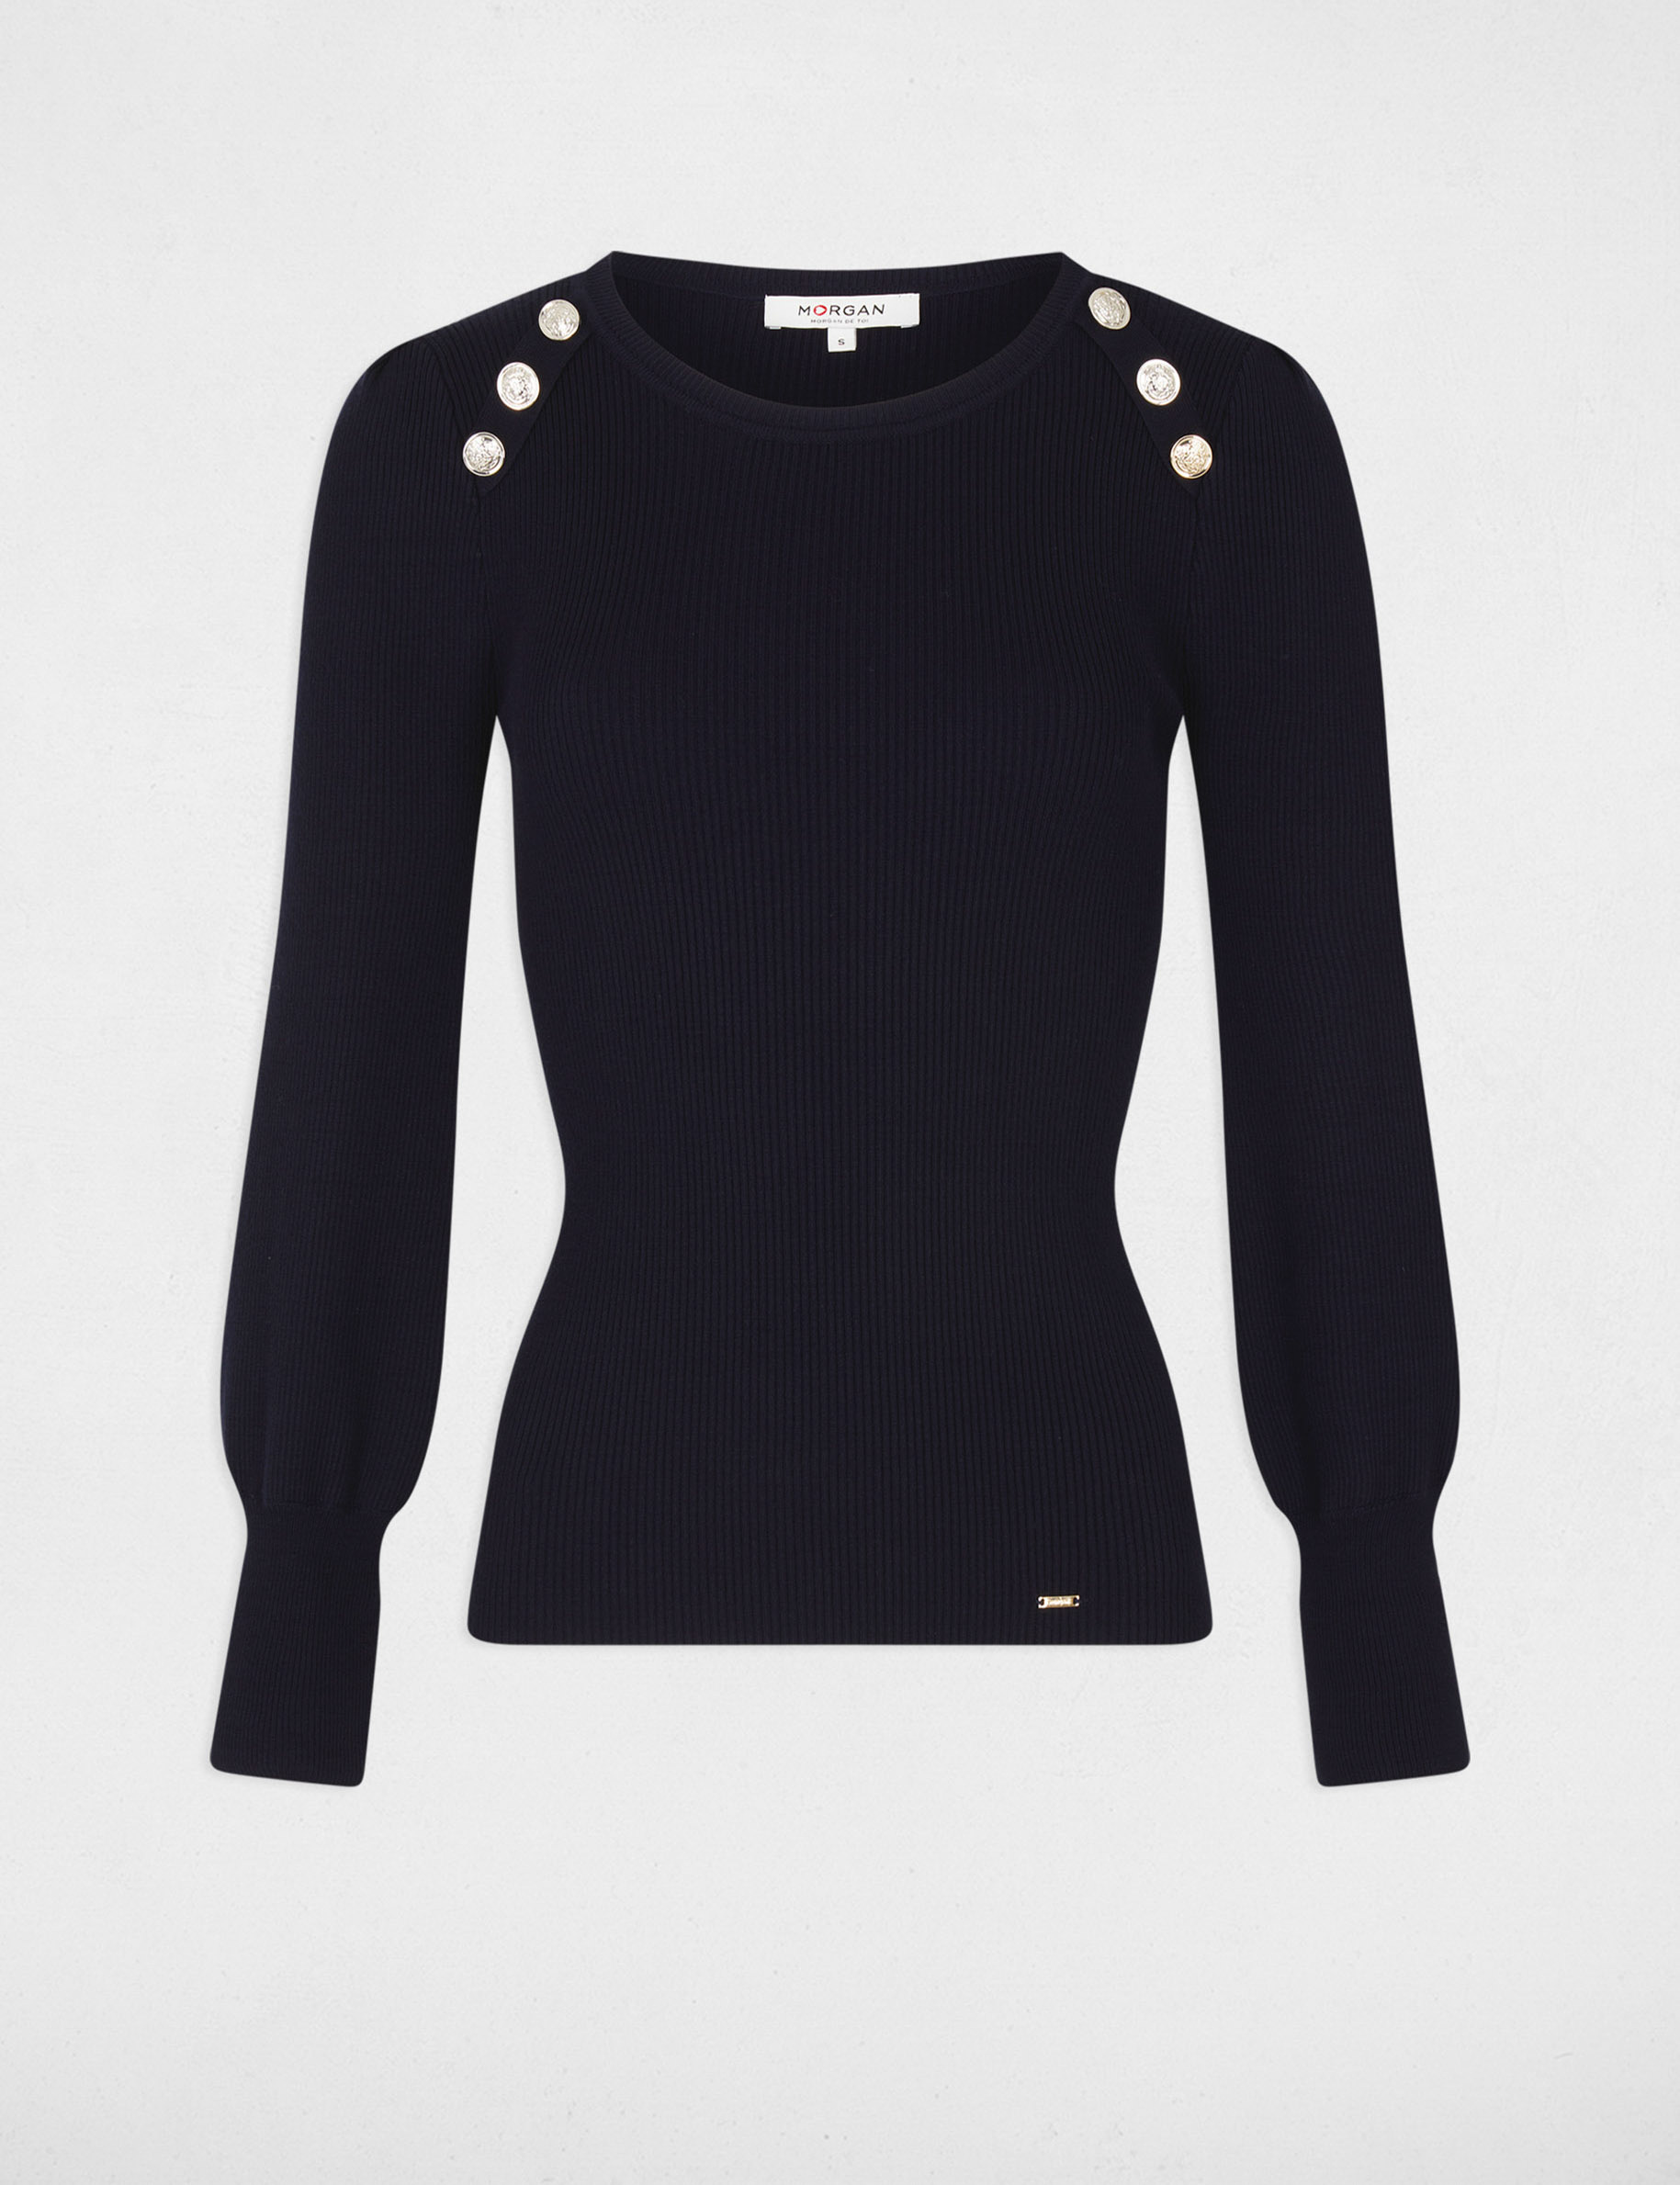 Long-sleeved jumper with buttons navy ladies'